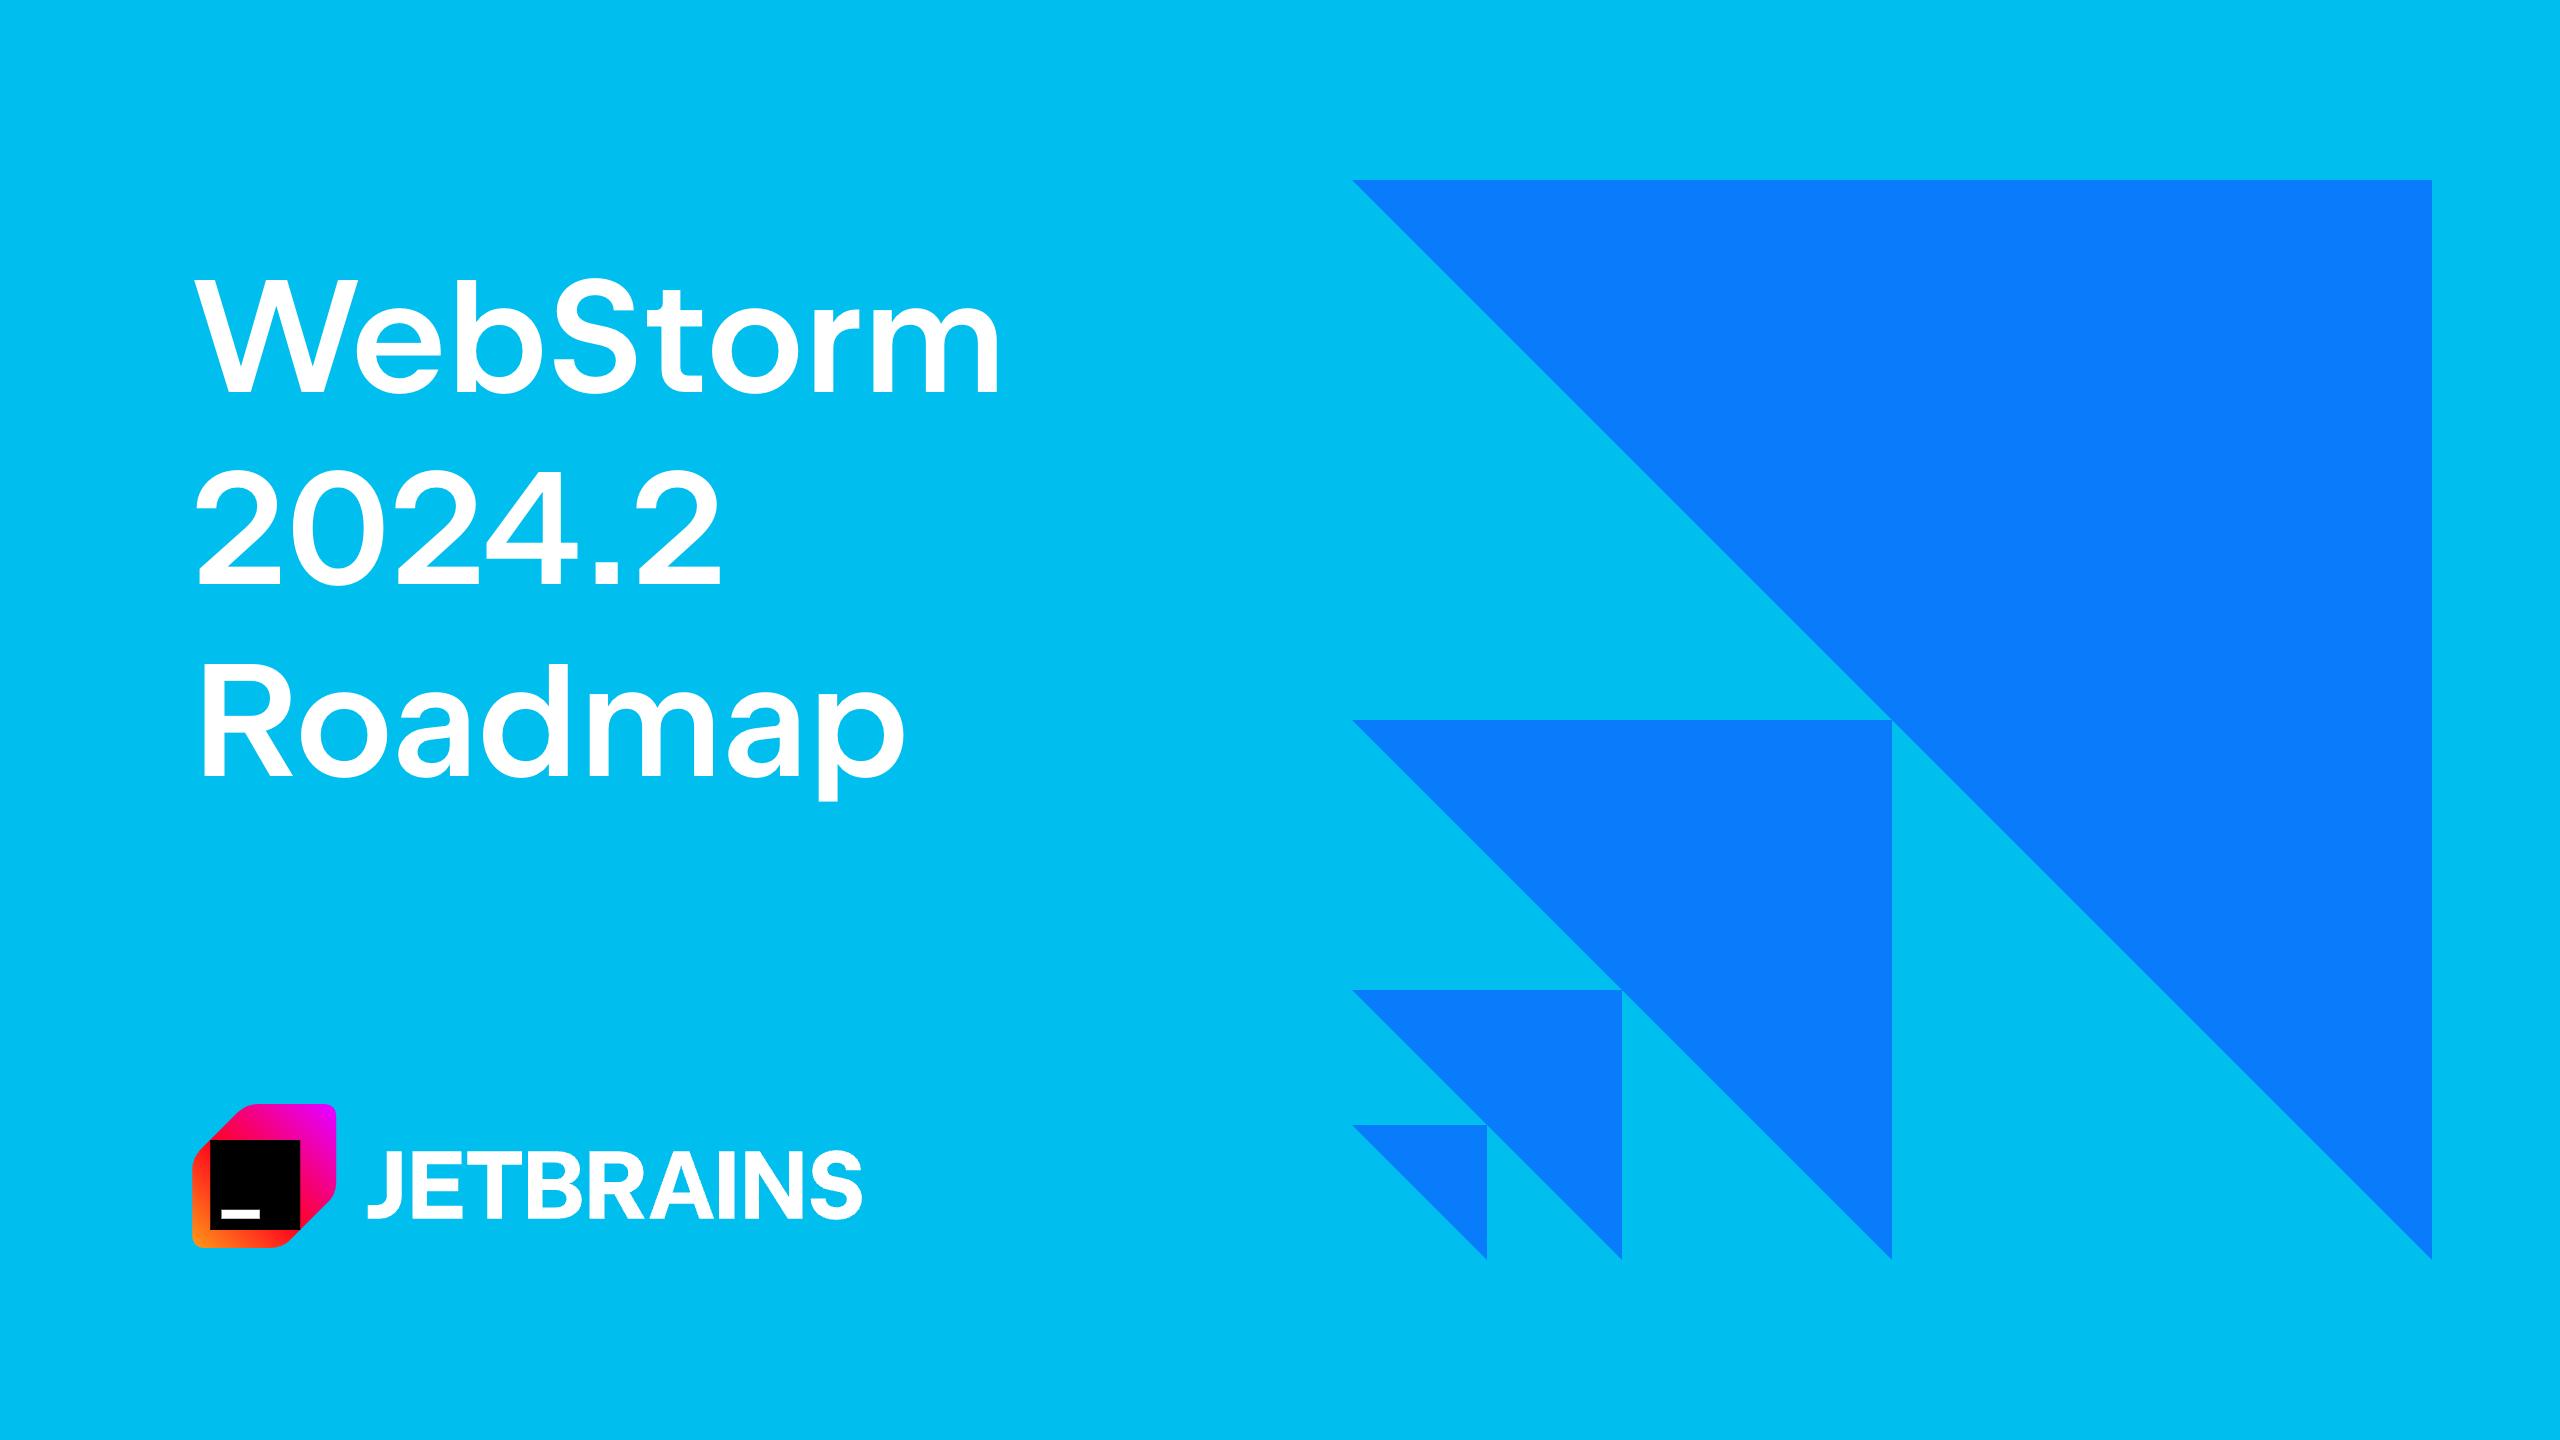 In April this year, we released WebStorm 2024.1, our first major update for 2024. Thank you to everyone who is already using it and providing us with 